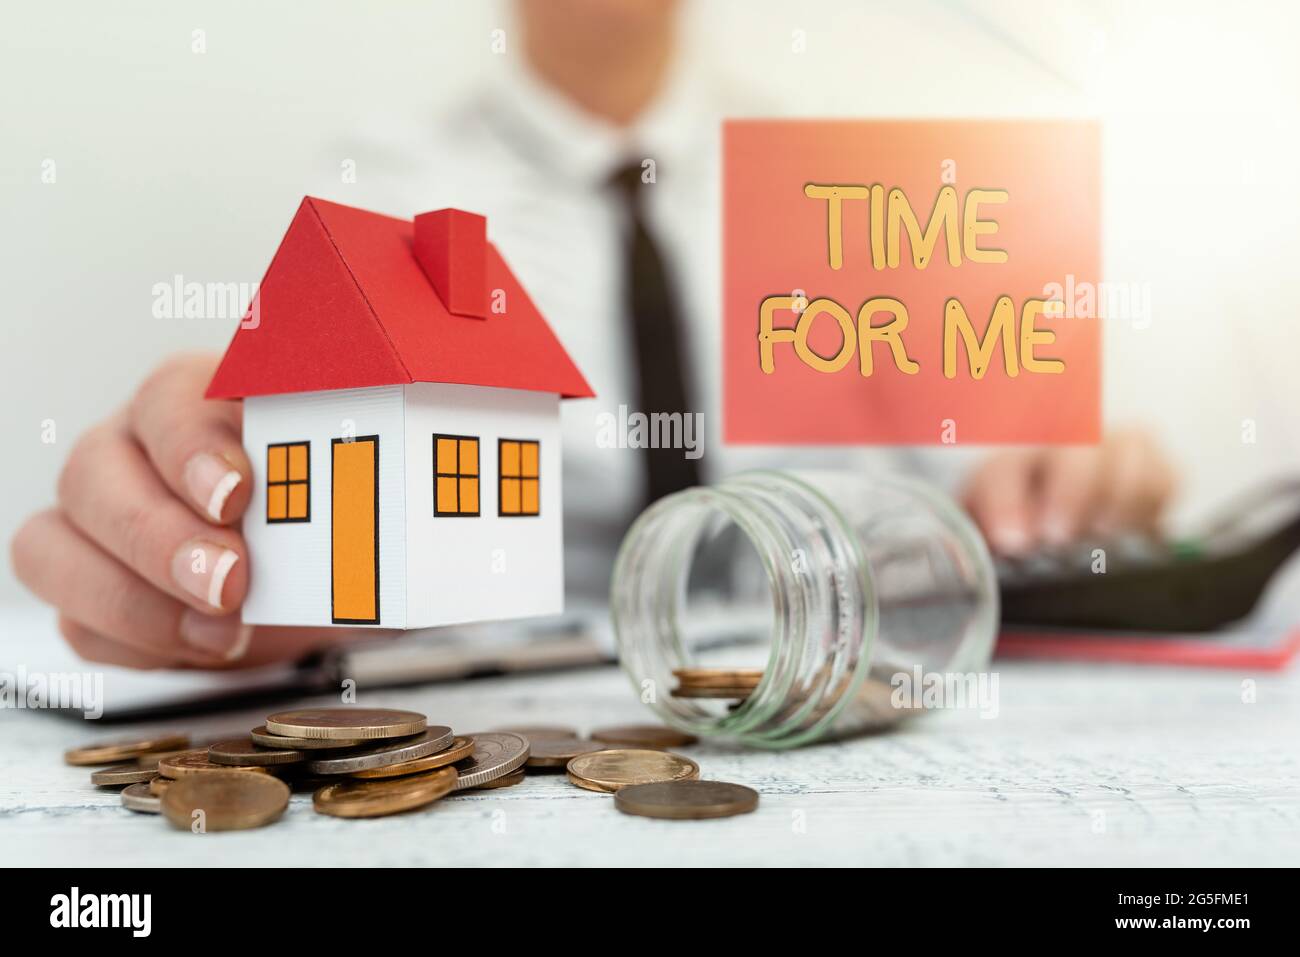 Text caption presenting Time For Me. Business overview practice of taking action preserve or improve ones own health New home installments and Stock Photo